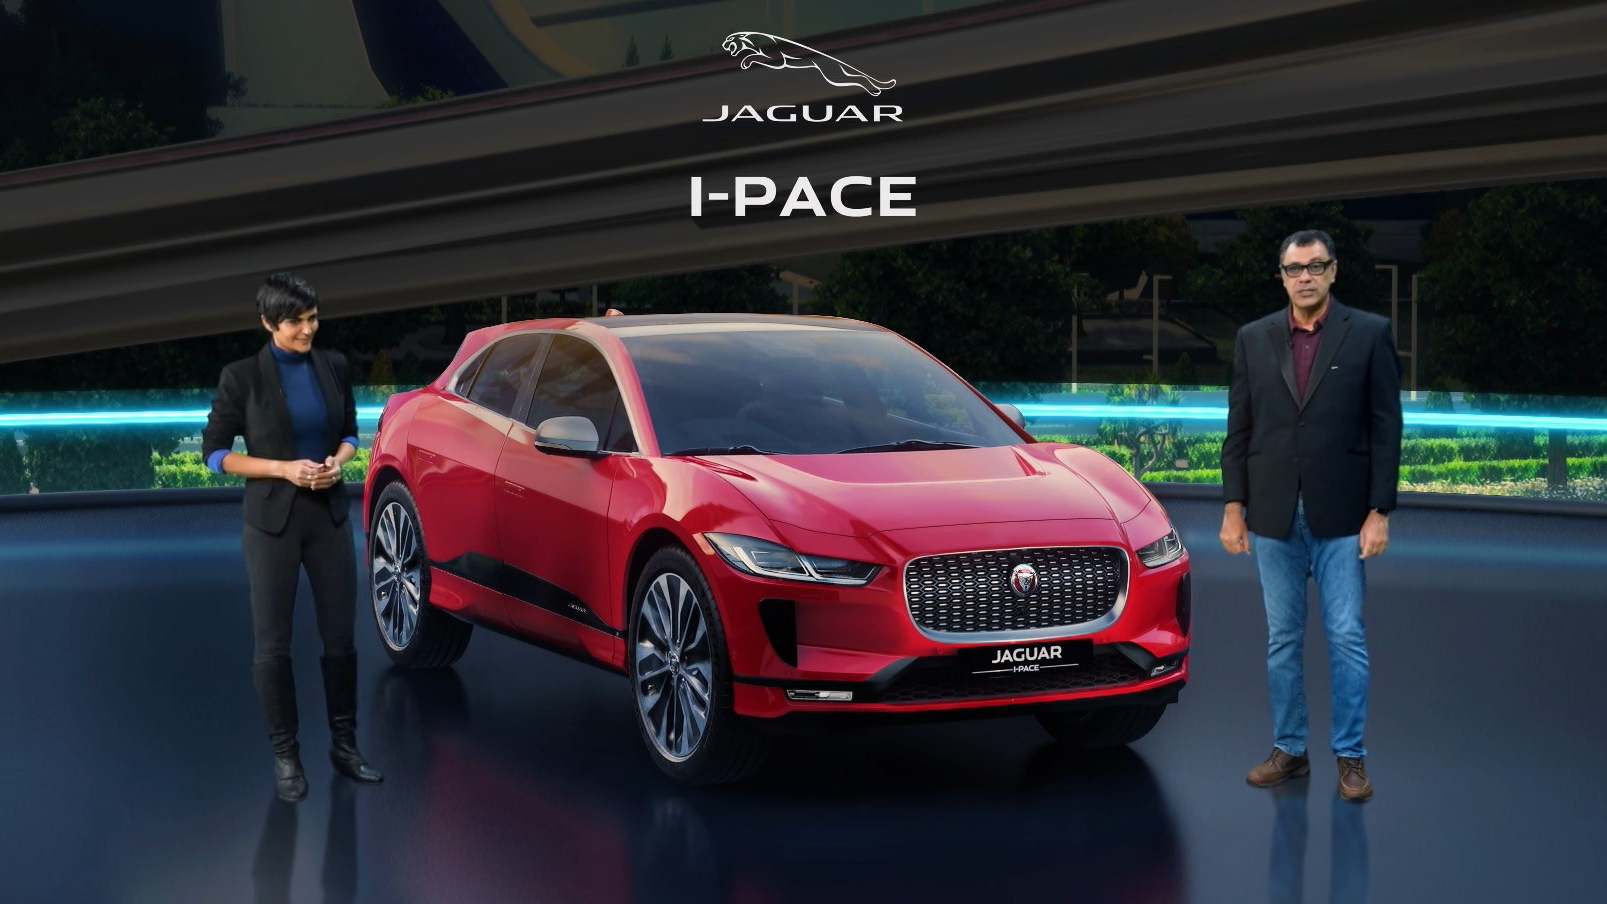 The Jaguar I-Pace is equipped with a 90 kWh lithium-ion battery. Image: Jaguar